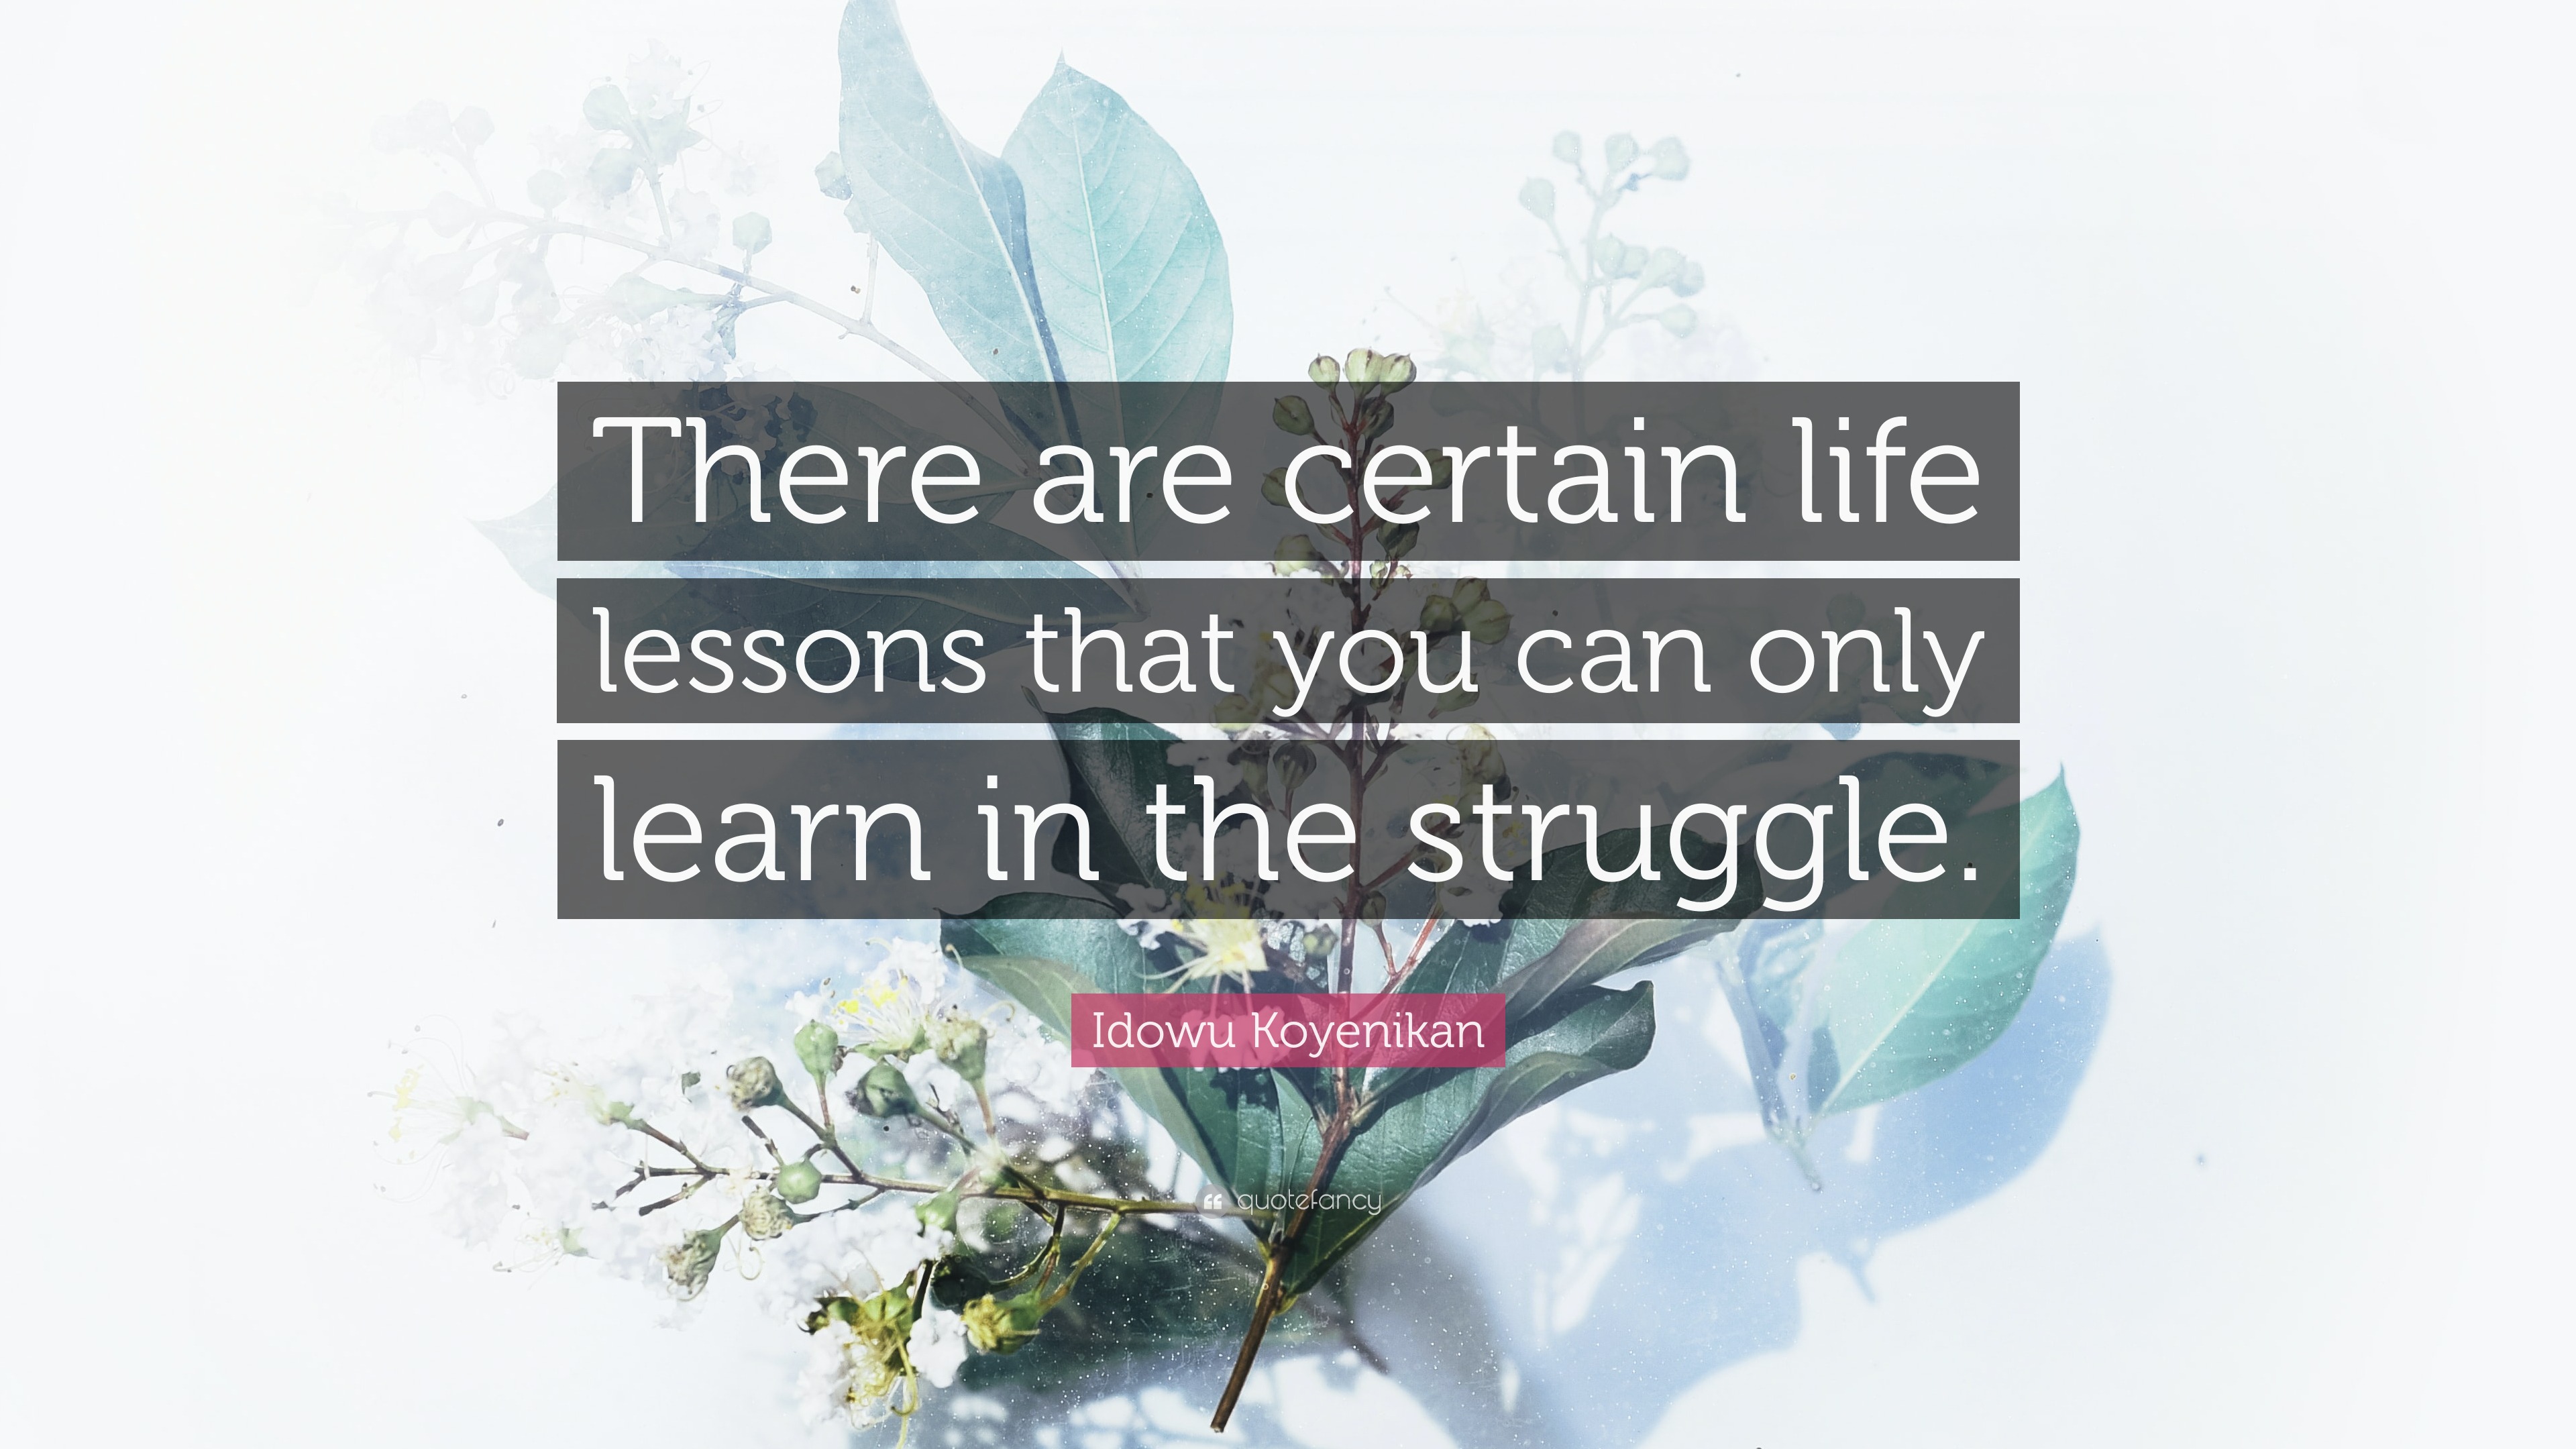 Idowu Koyenikan Quote: “There are certain life lessons that you